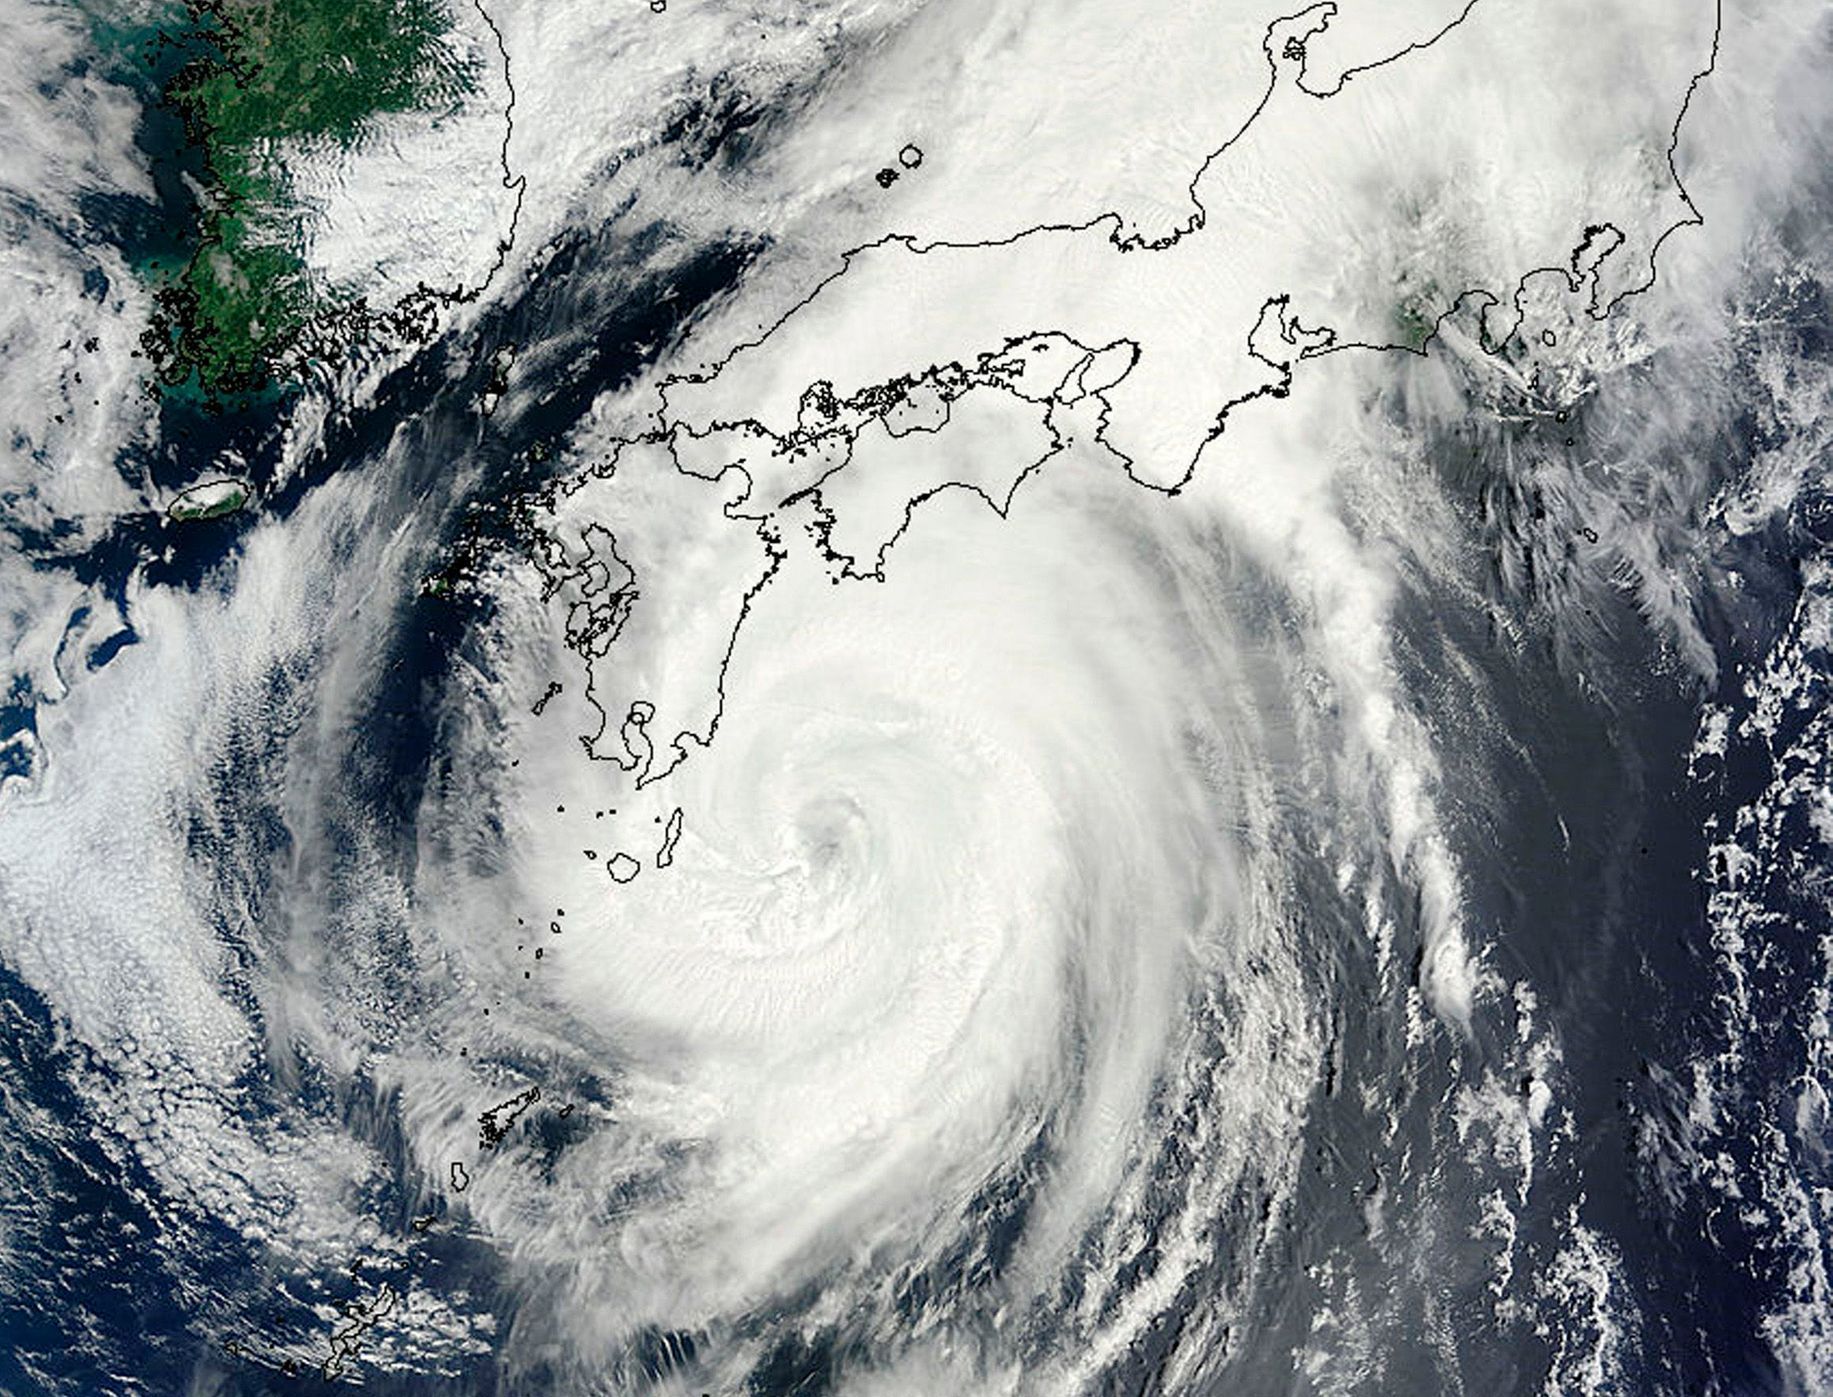 MODIS image from NASA's Terra satellite shows Typhoon Halong in the Pacific Ocean